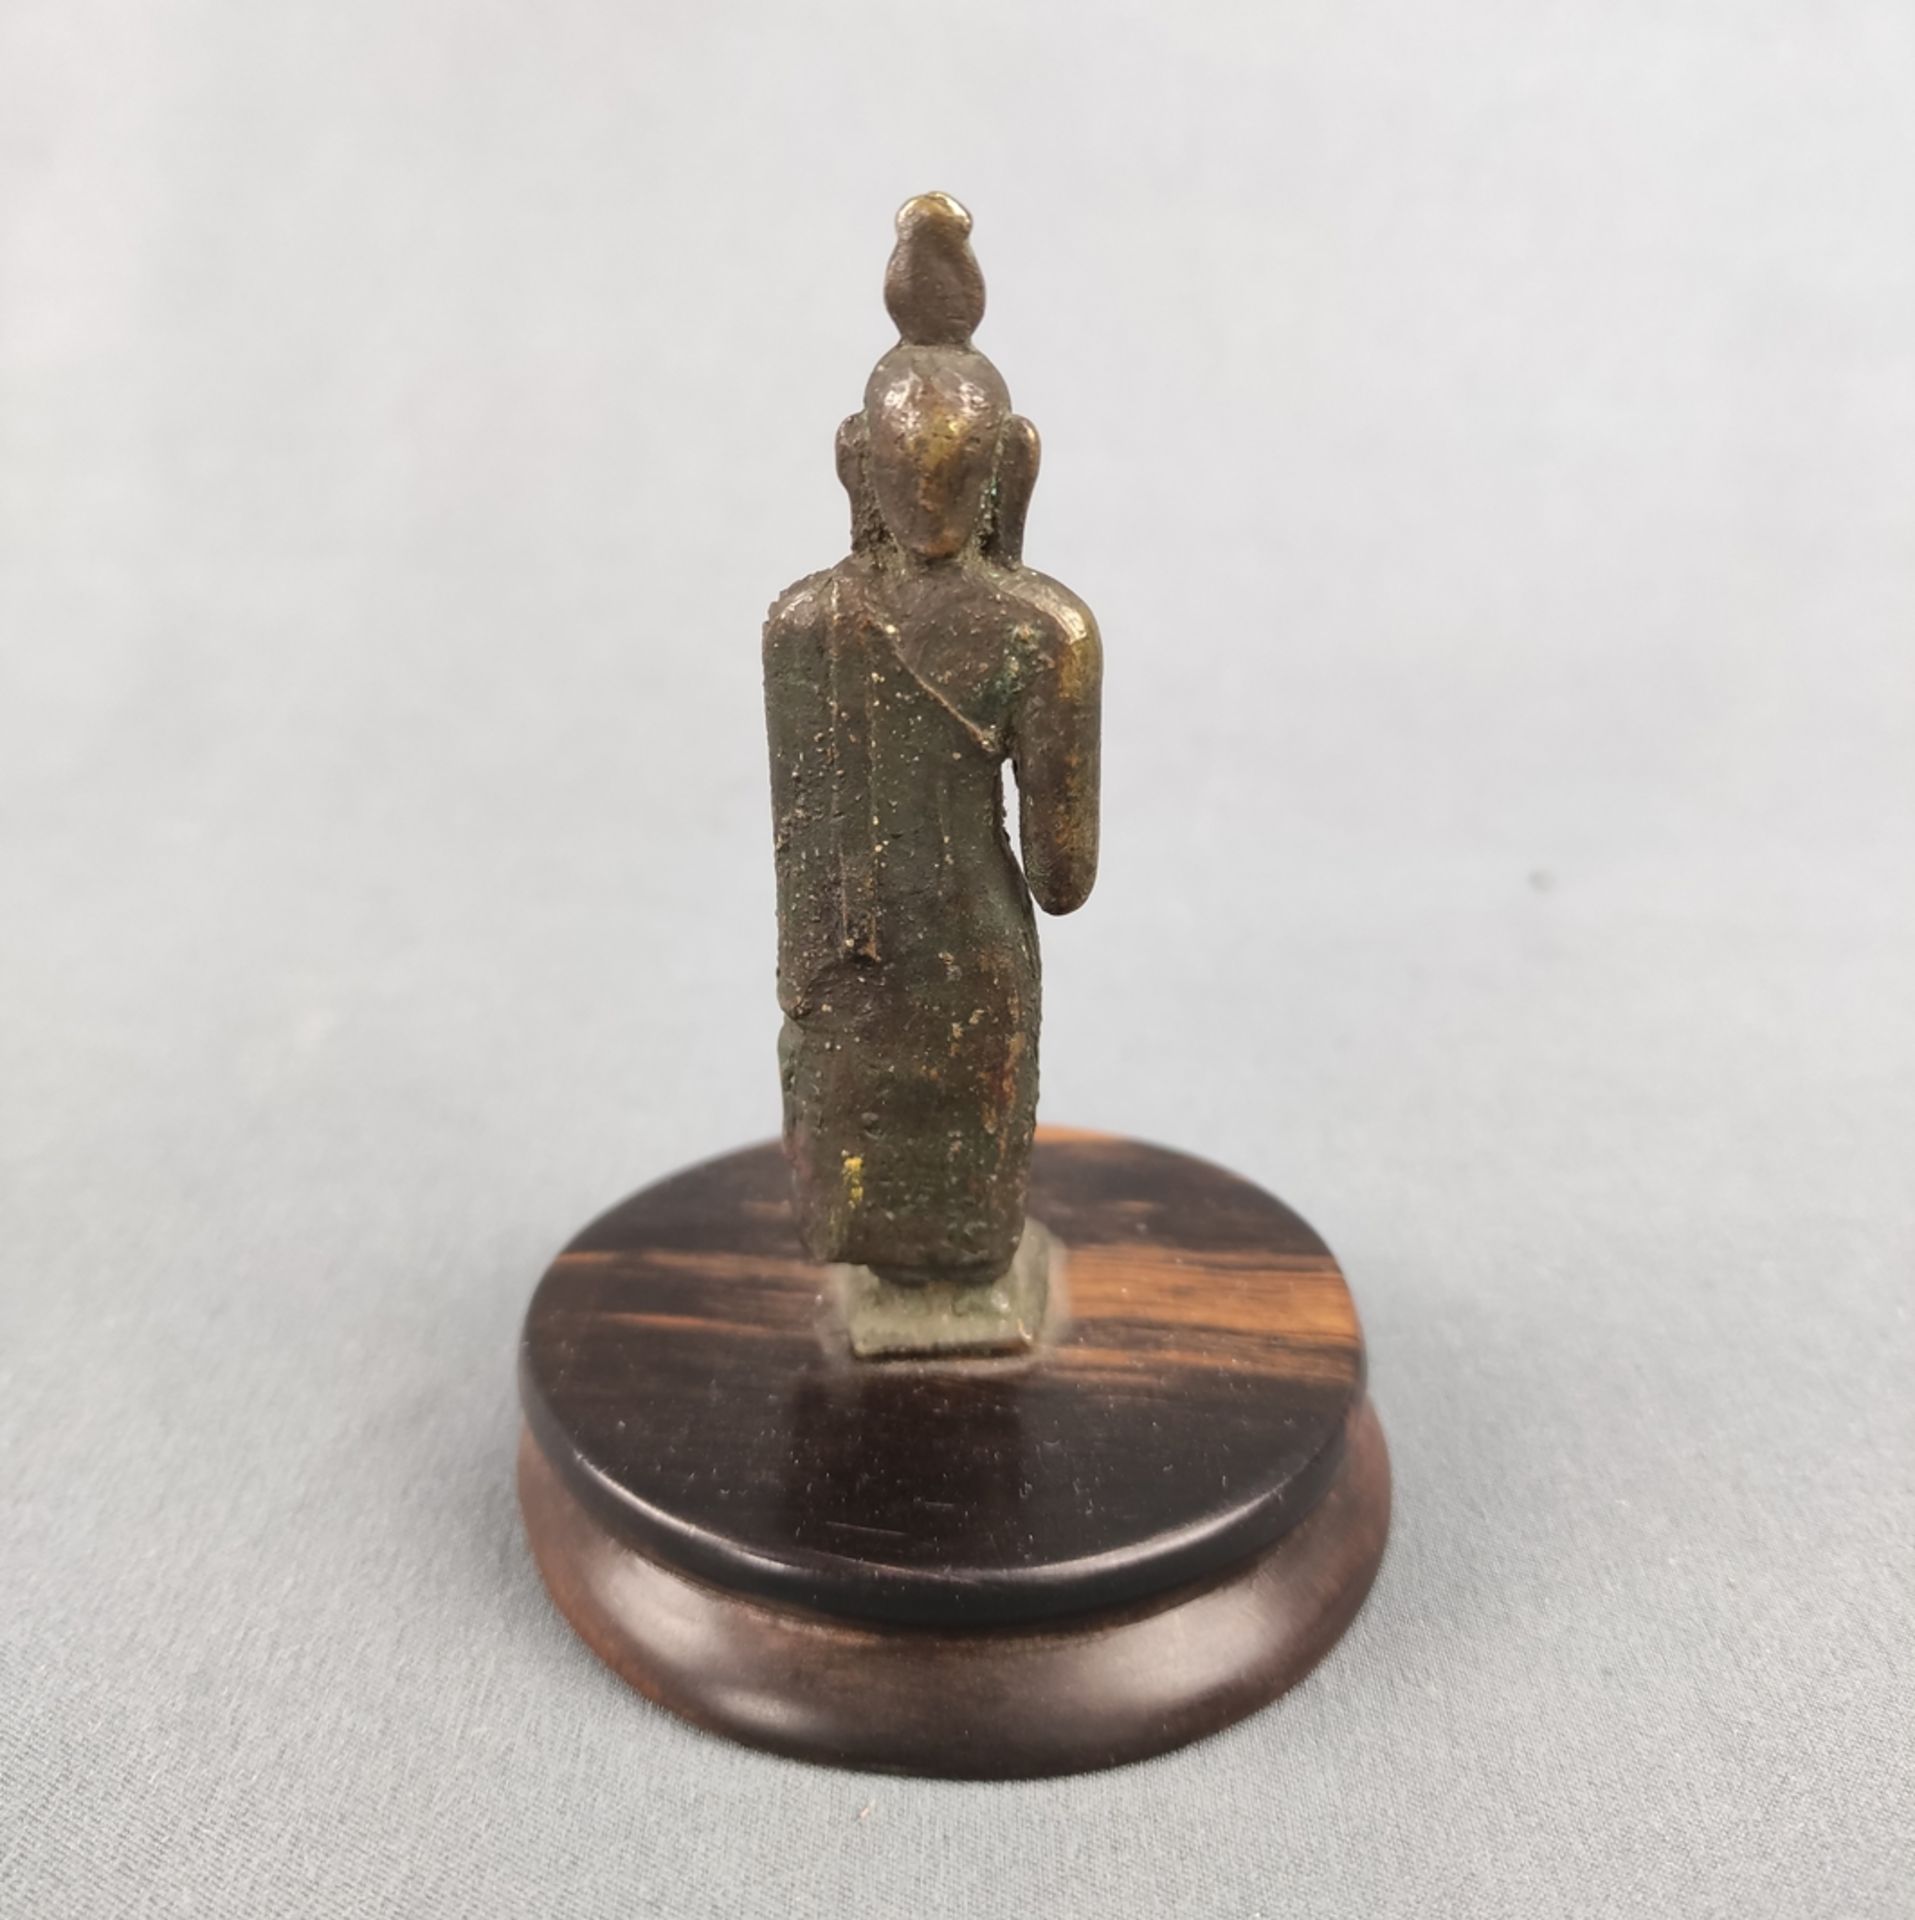 Small Buddha figure, probably Ceylon, probably 17th century, bronze on small round base, height 10. - Image 3 of 3